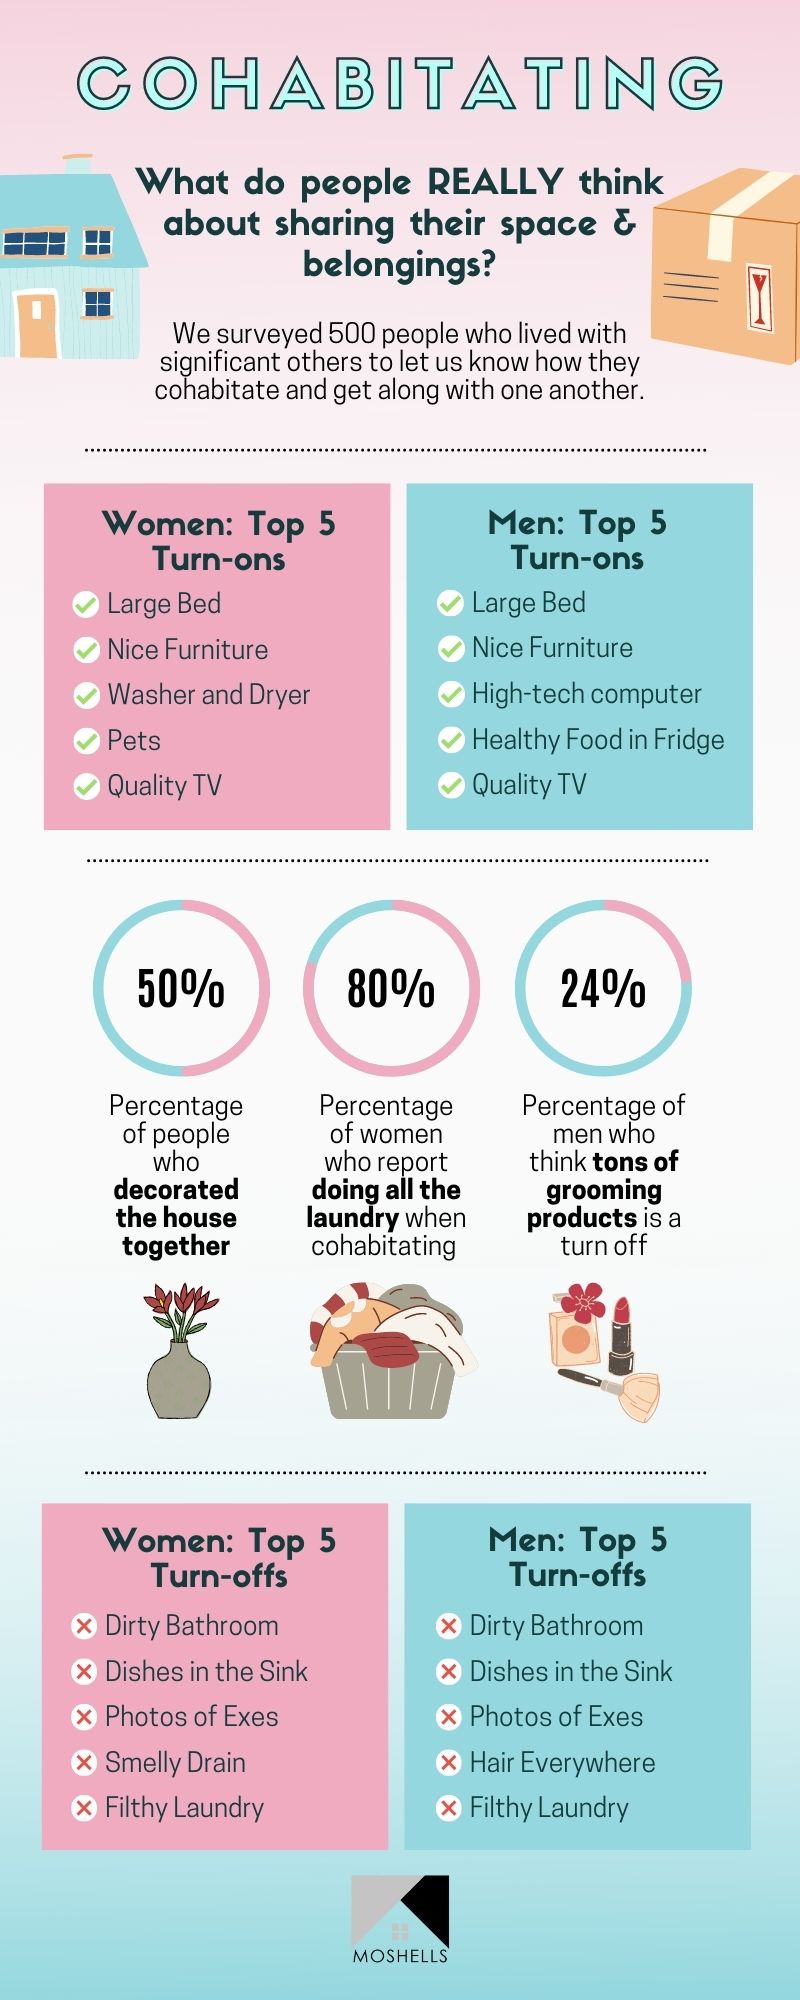 Infographic about couples and their cohabitation preferences